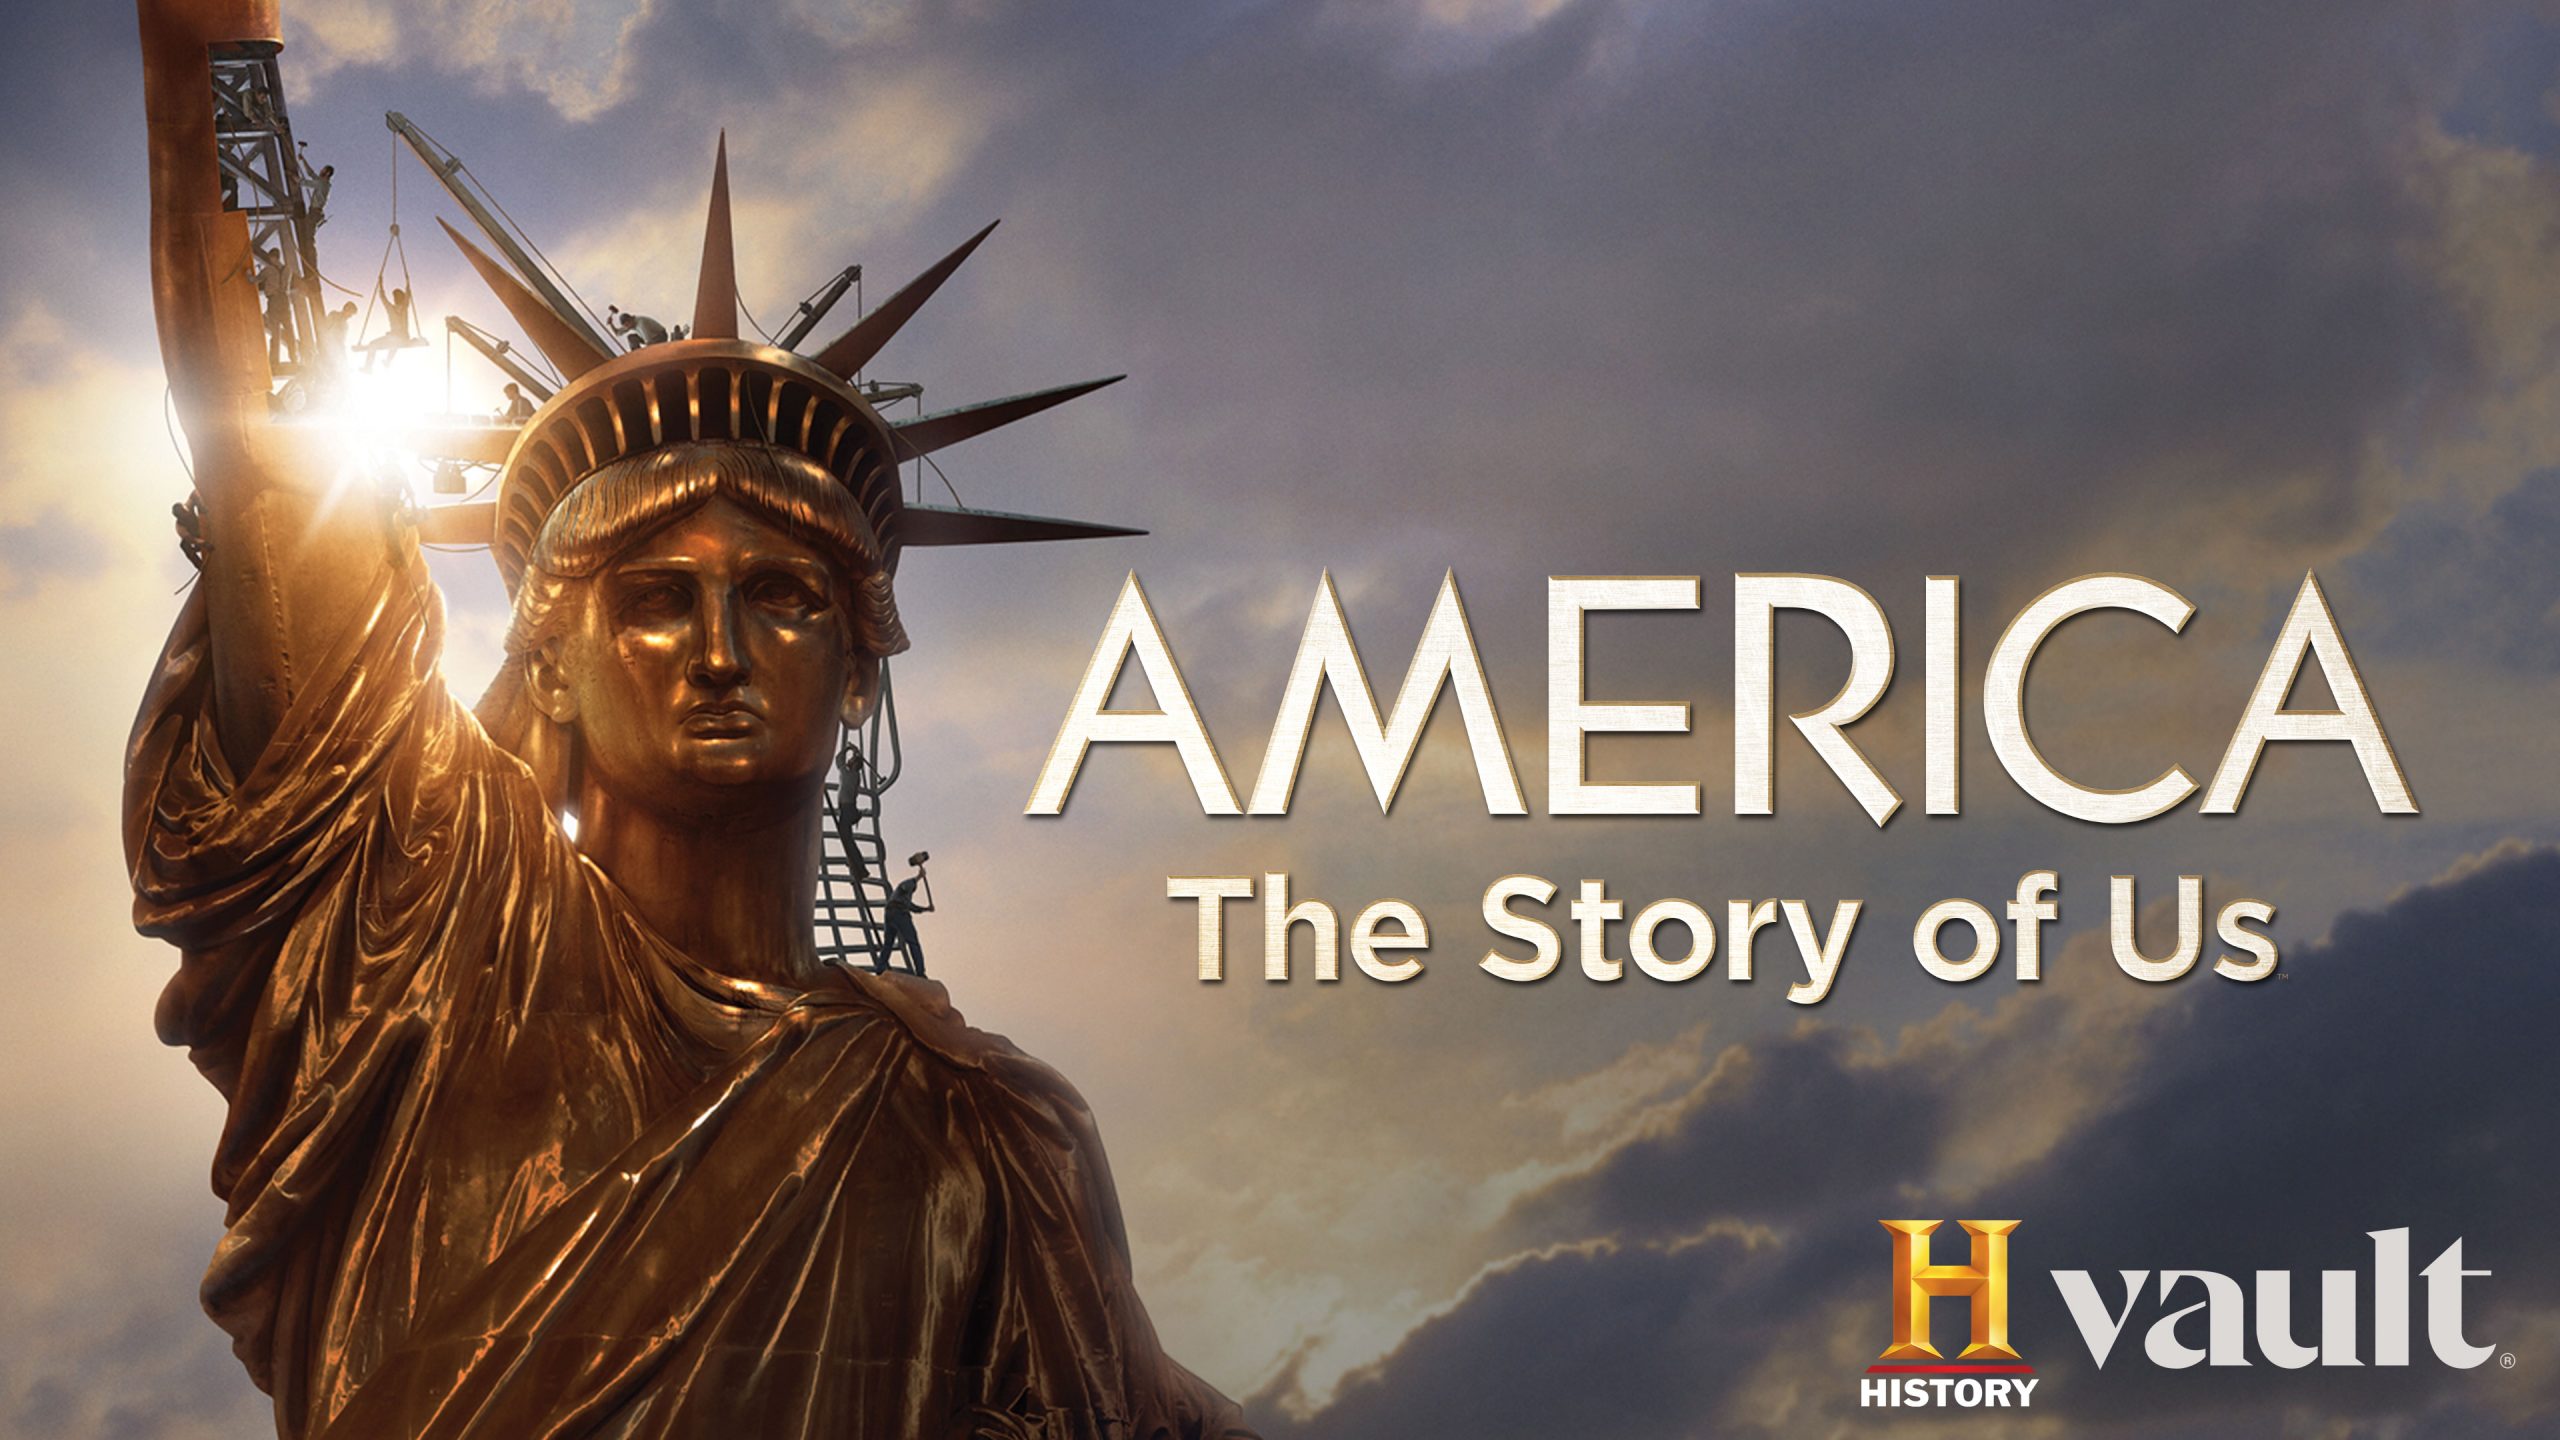 Watch America the Story of Us on HISTORY Vault